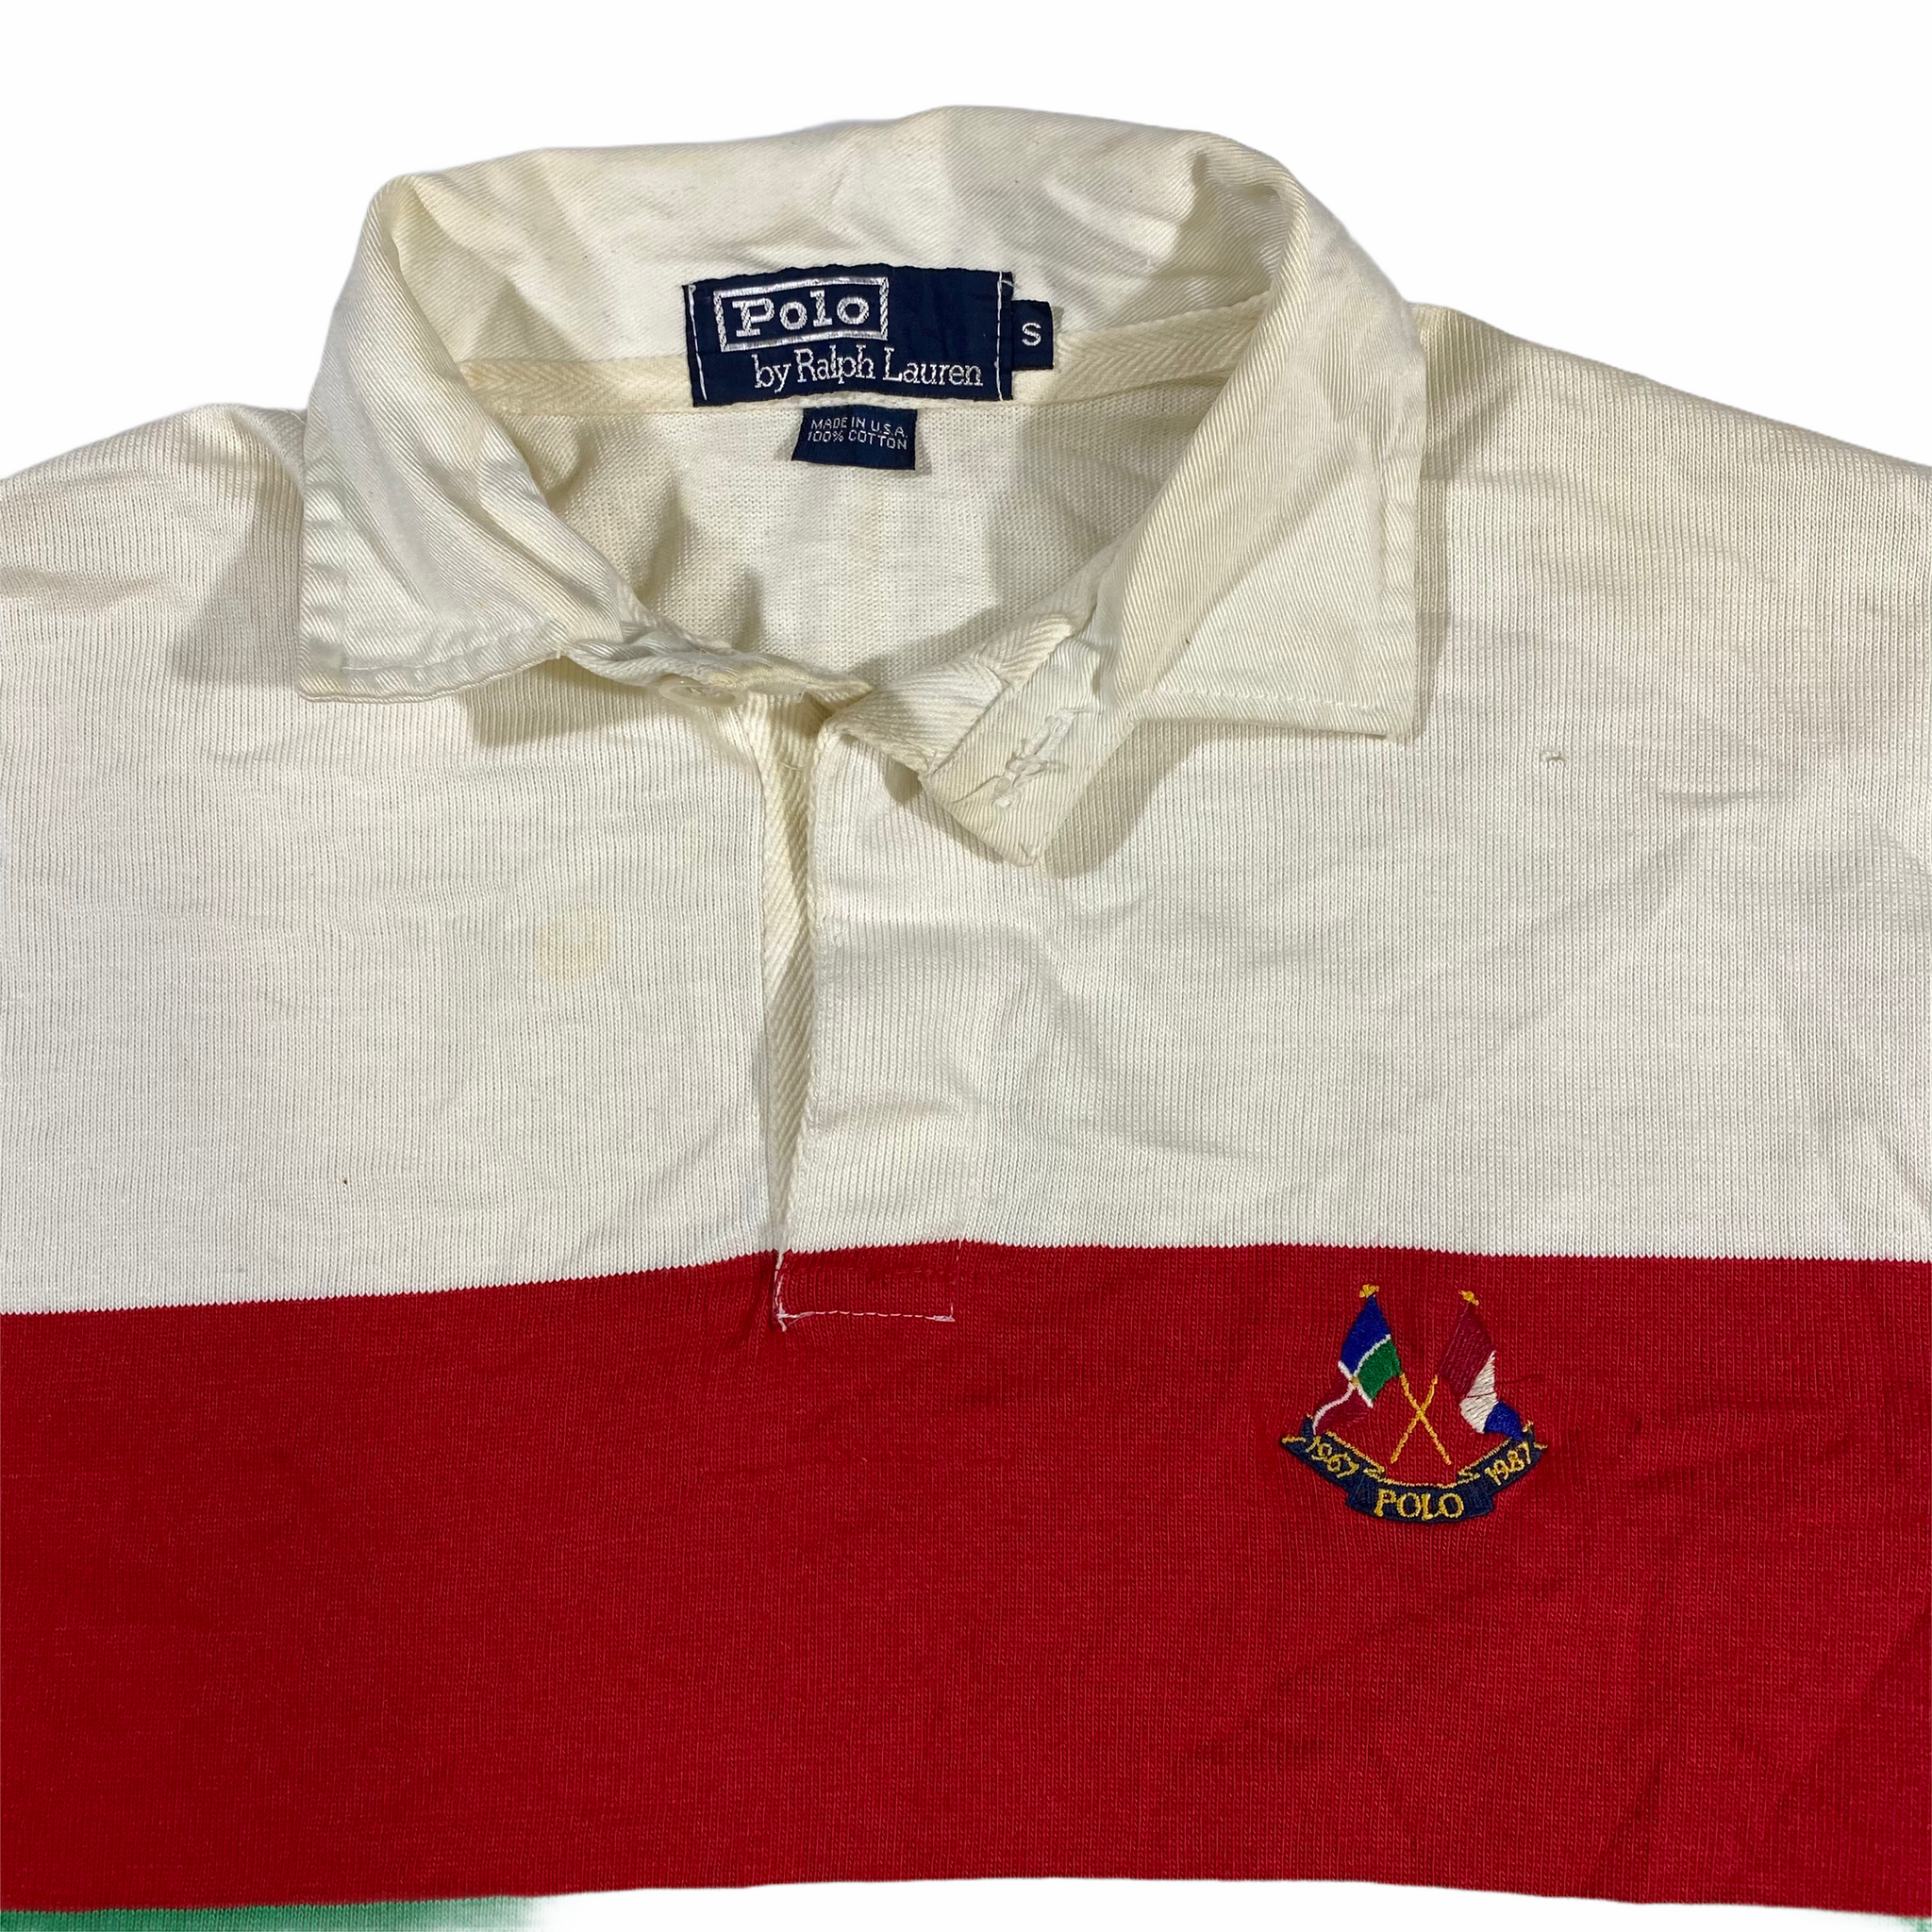 Polo ralph lauren 1987 cross flags rugby Small – Vintage Sponsor